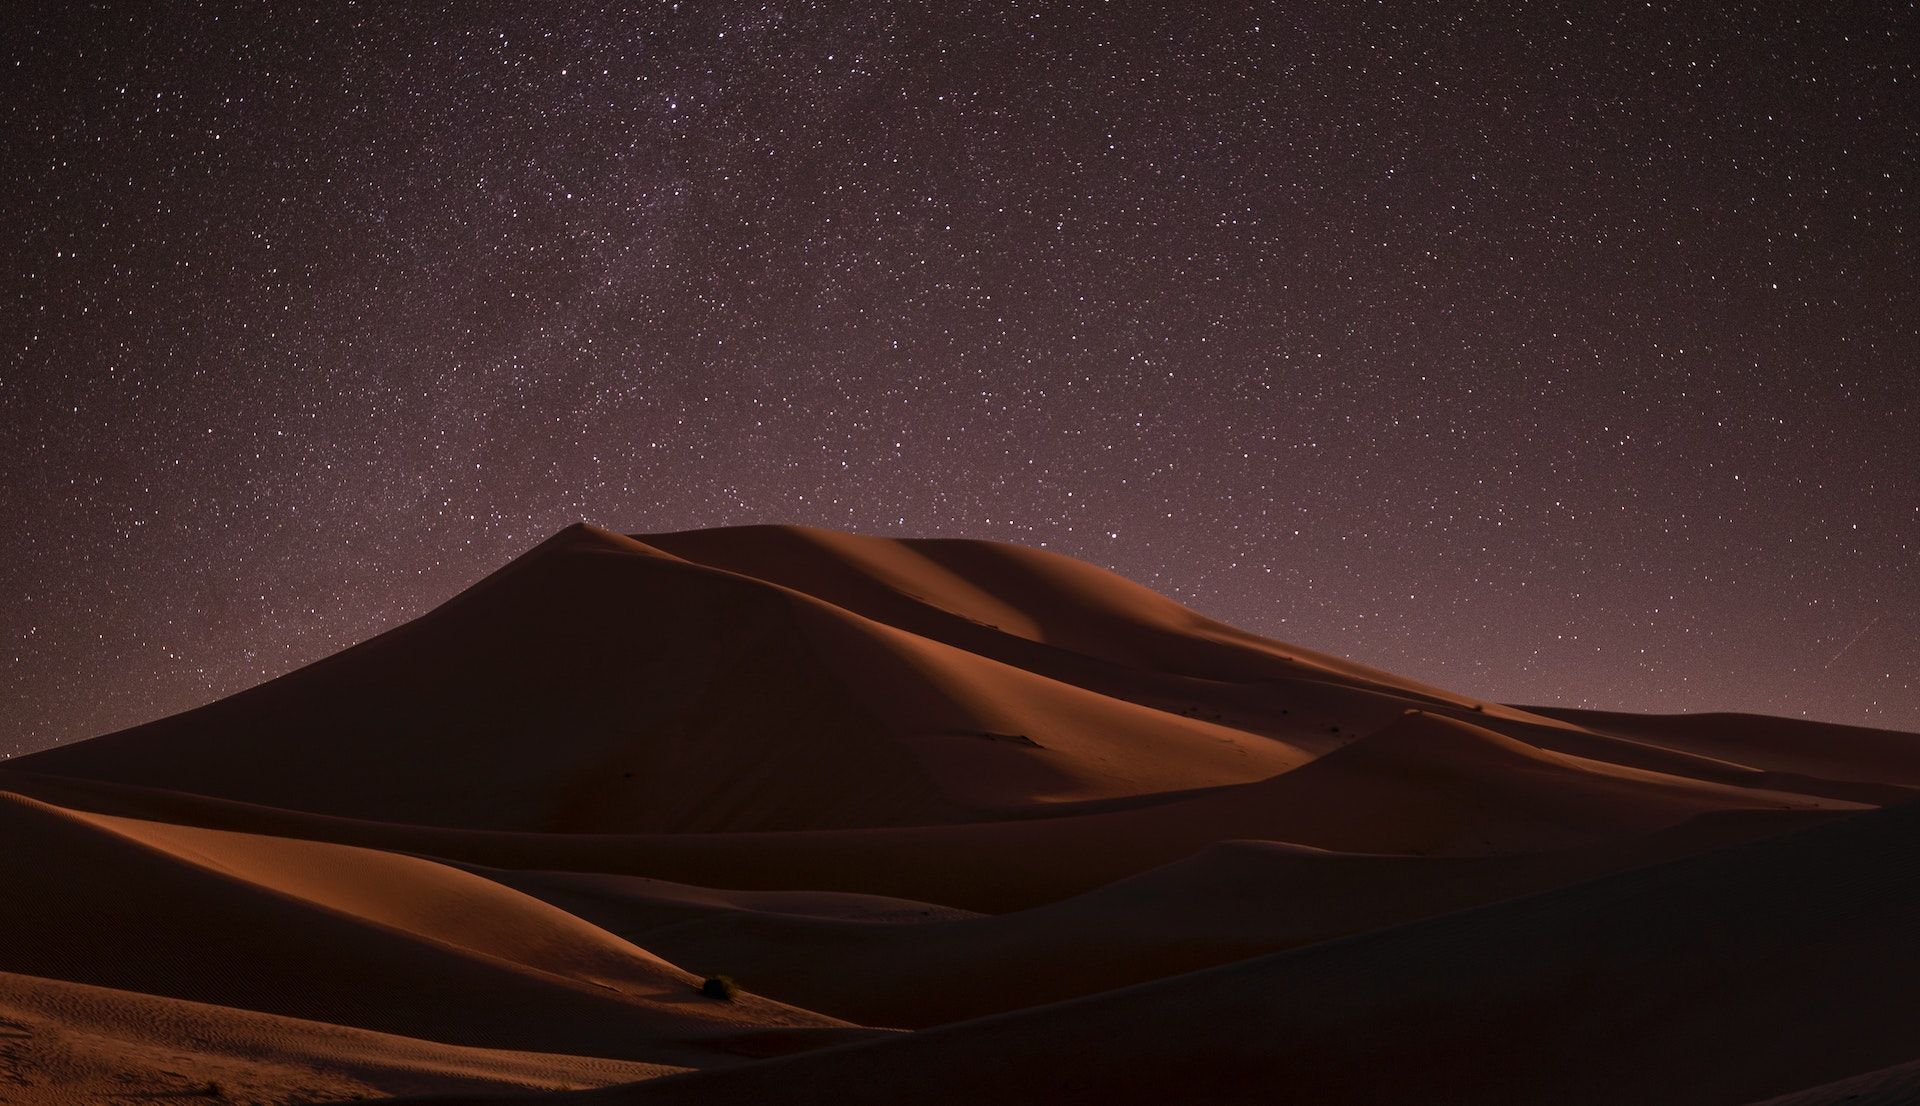 Photo of sand dunes at night, under a starry sky